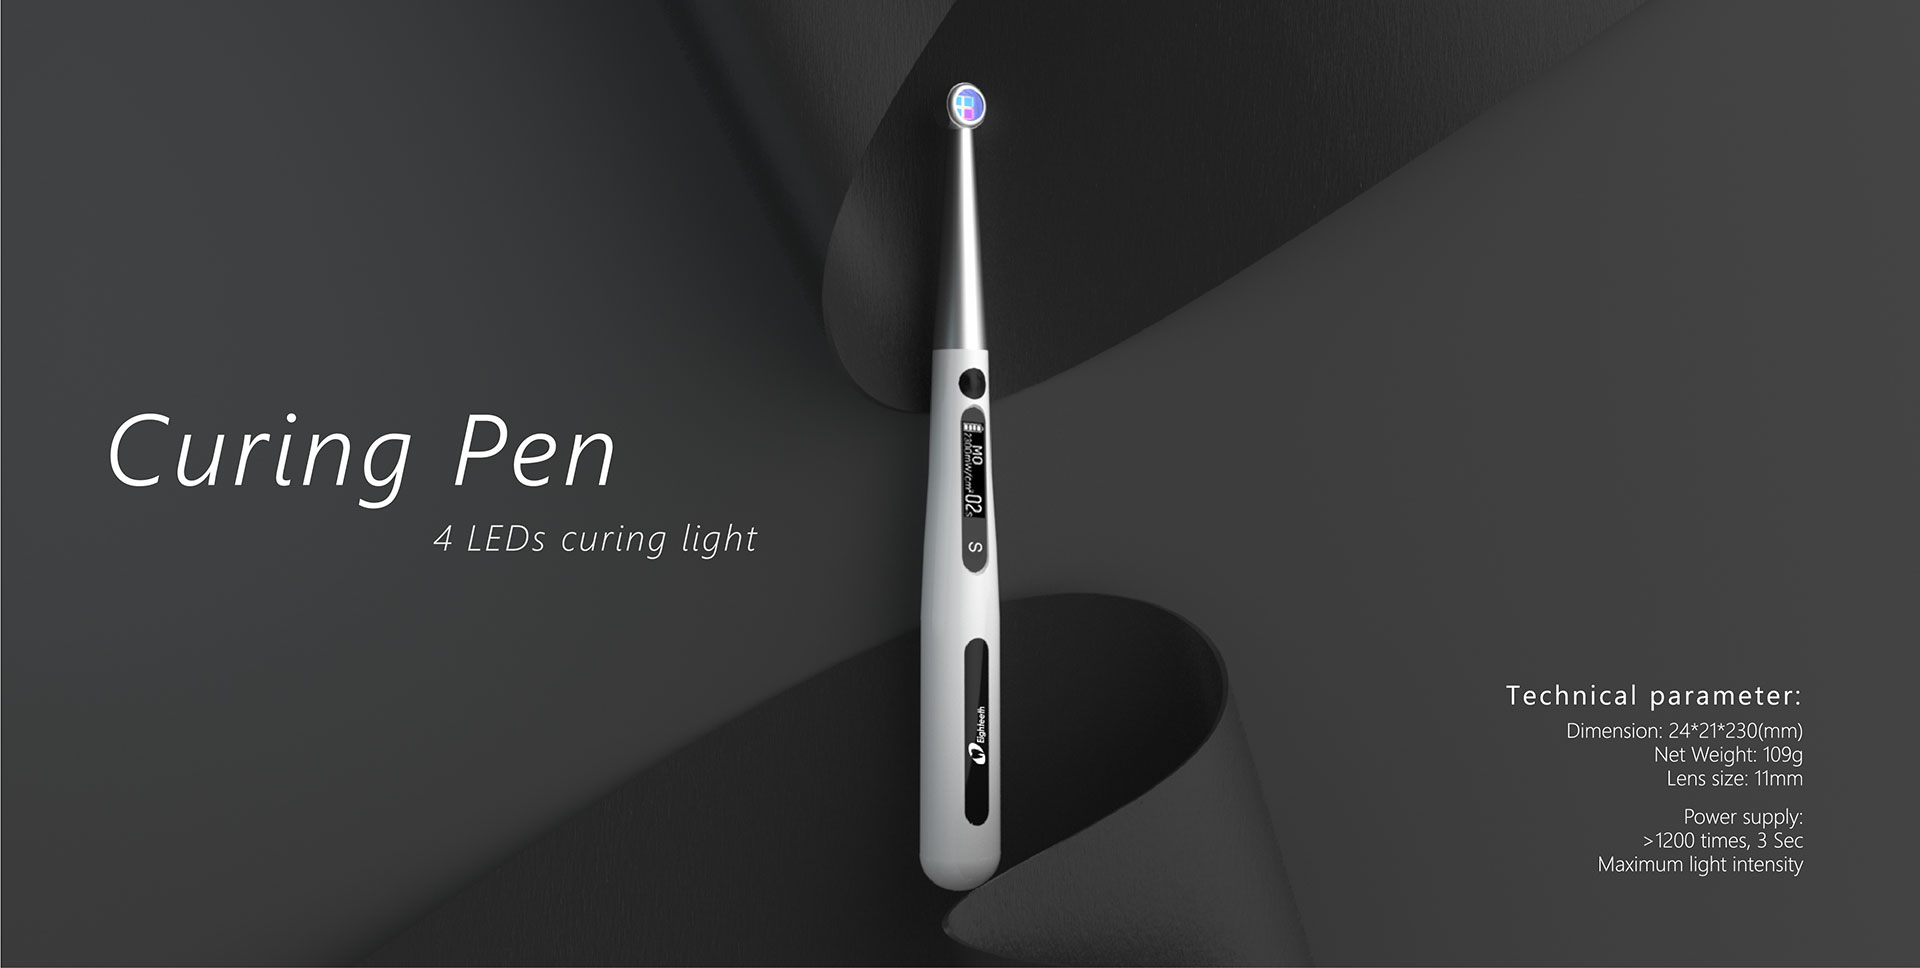 CuringPen - LED Curing Light - Changzhou Sifary Medical Technology Co.,Ltd.